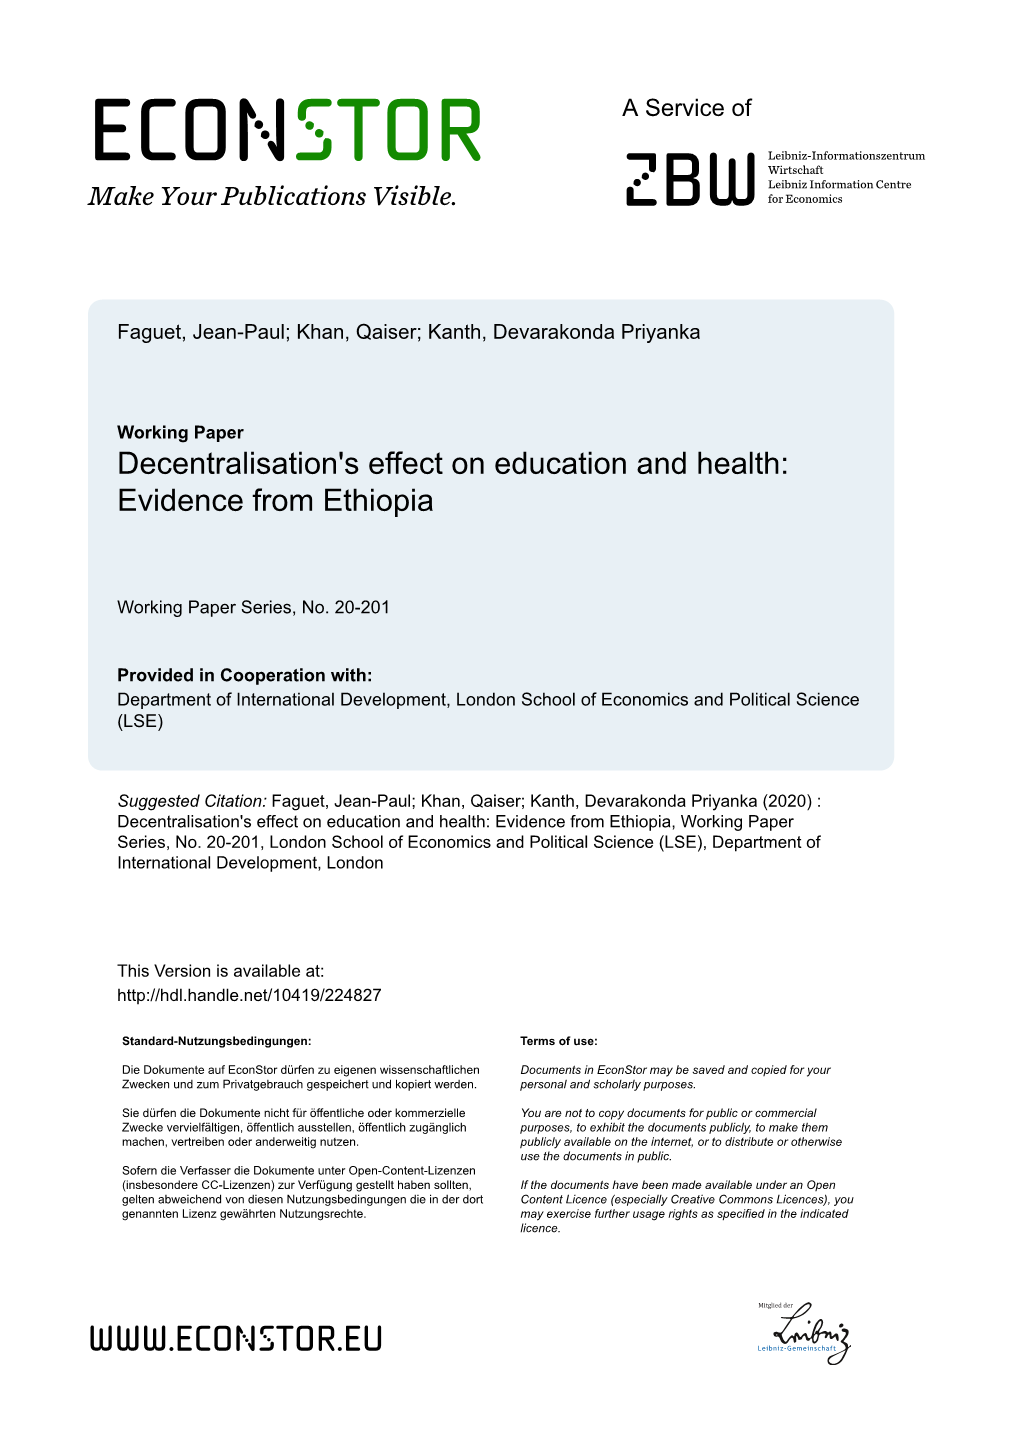 Decentralisation's Effect on Education and Health: Evidence from Ethiopia